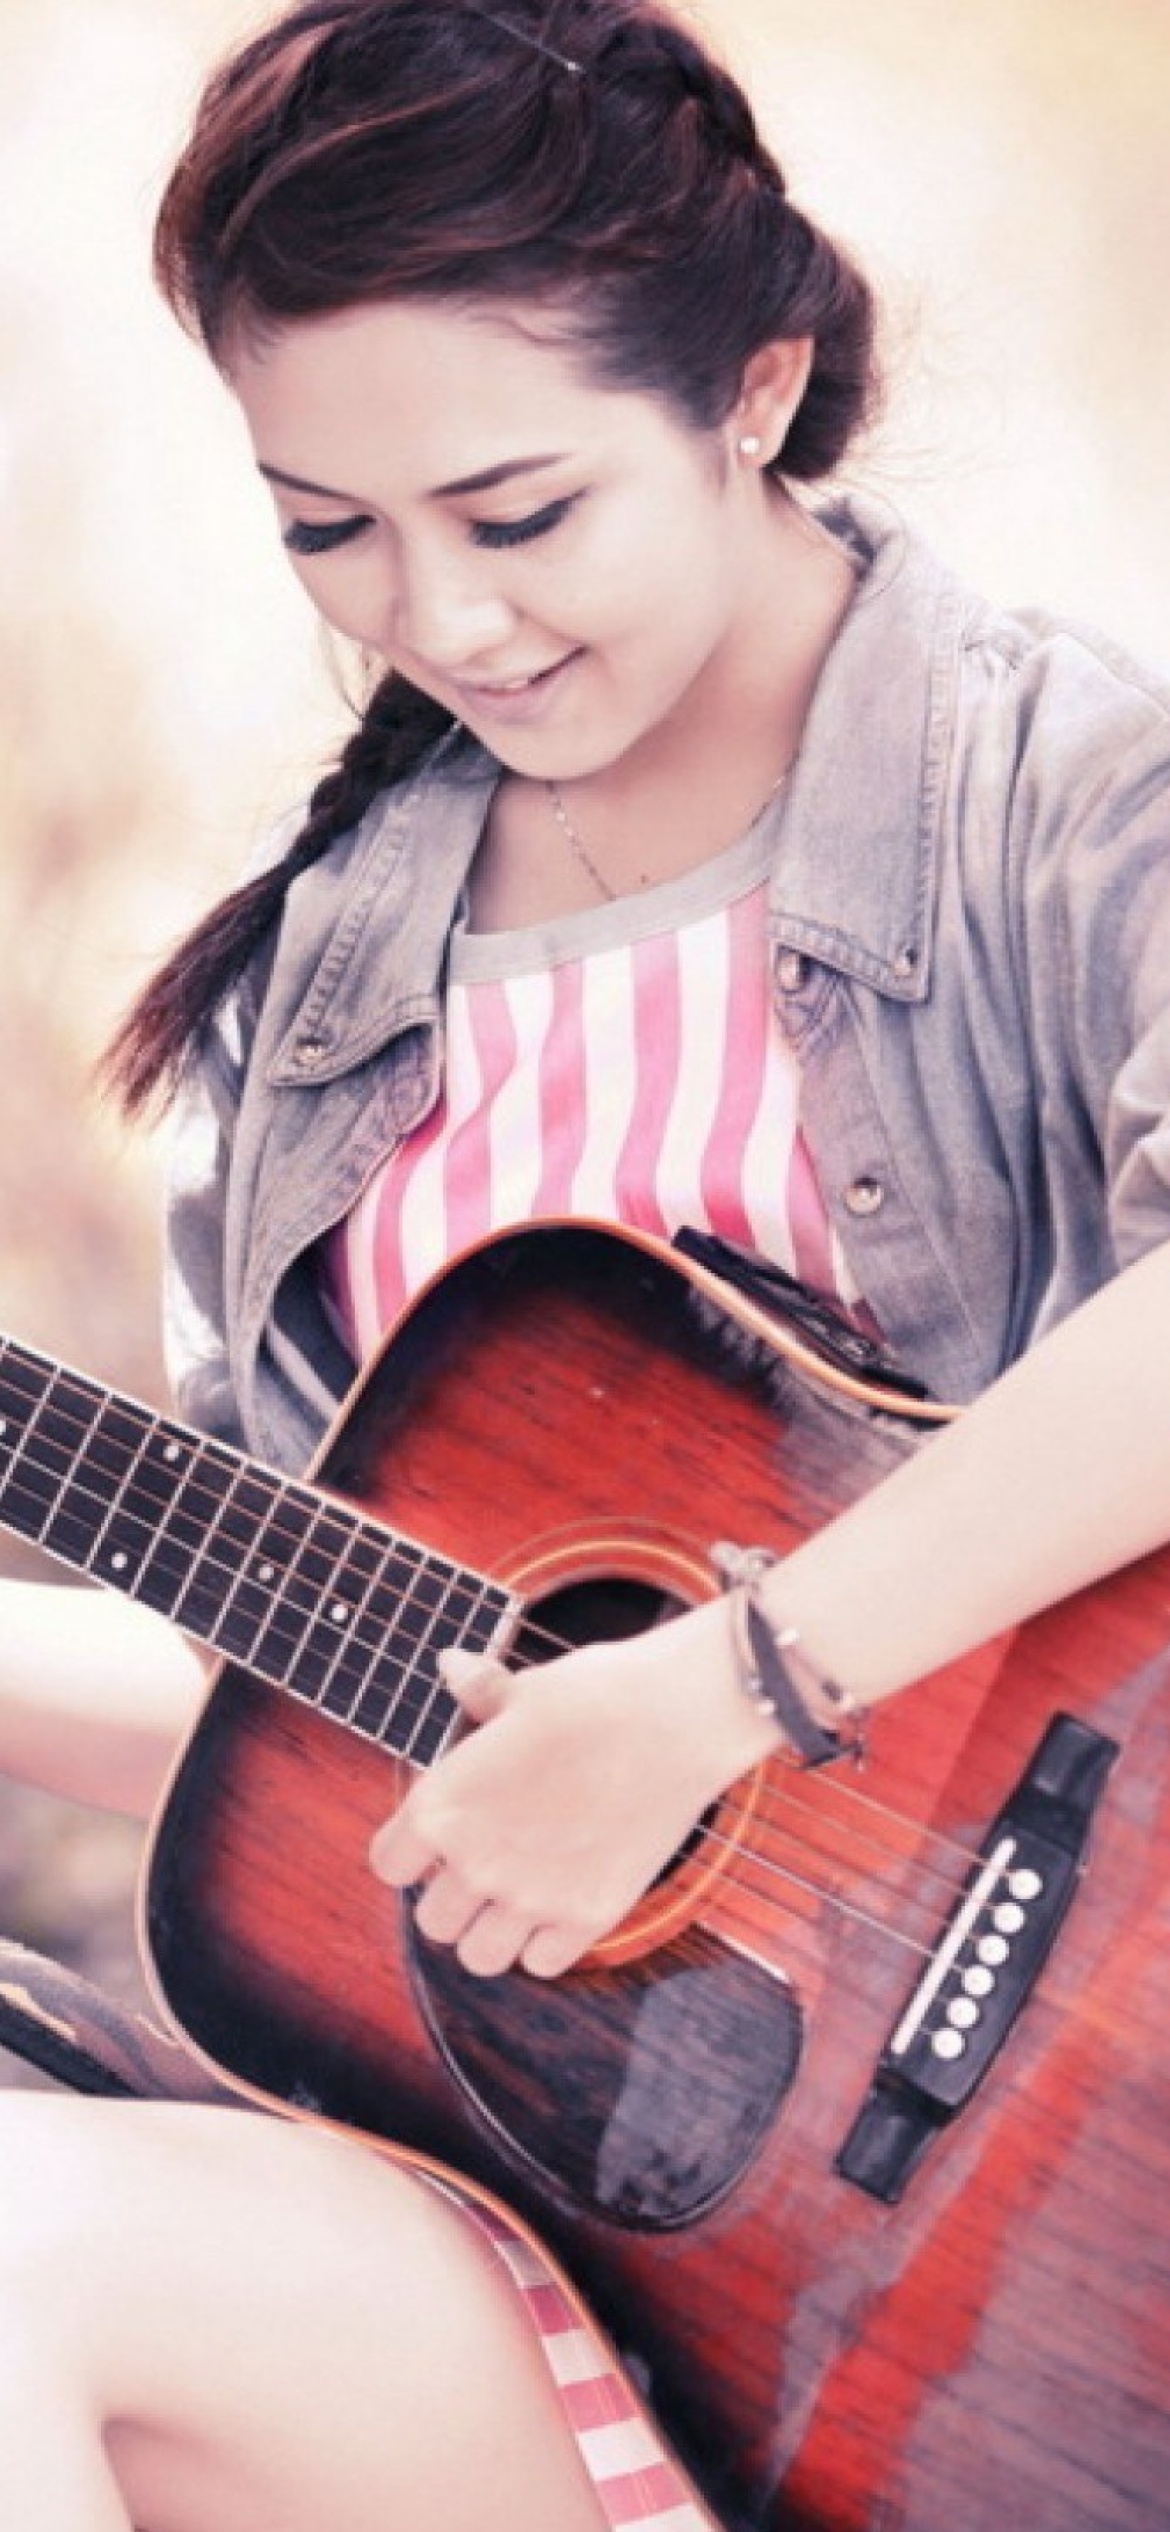 Das Chinese girl with guitar Wallpaper 1170x2532